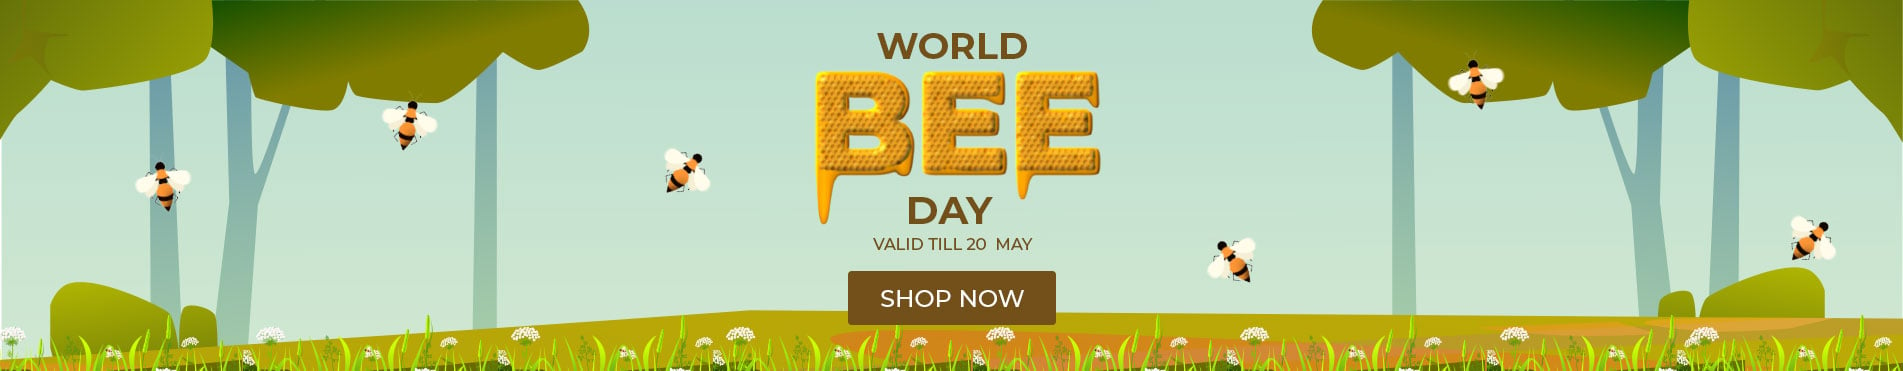 Bee day